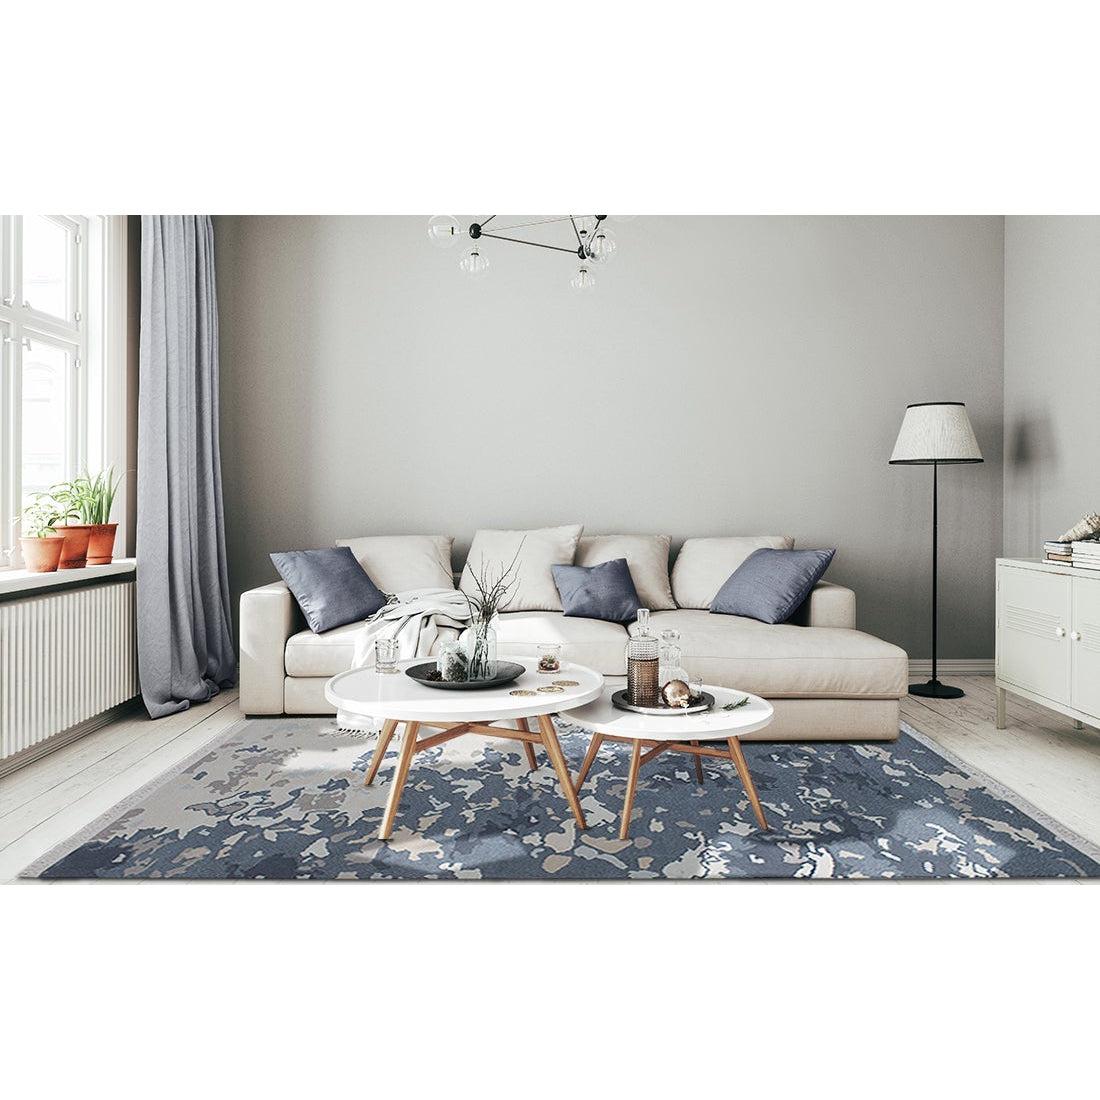 Rugs by Roo | Organic Weave Branksome Blue Gray Wool Handknotted Rug-OW-BRABLG-0508